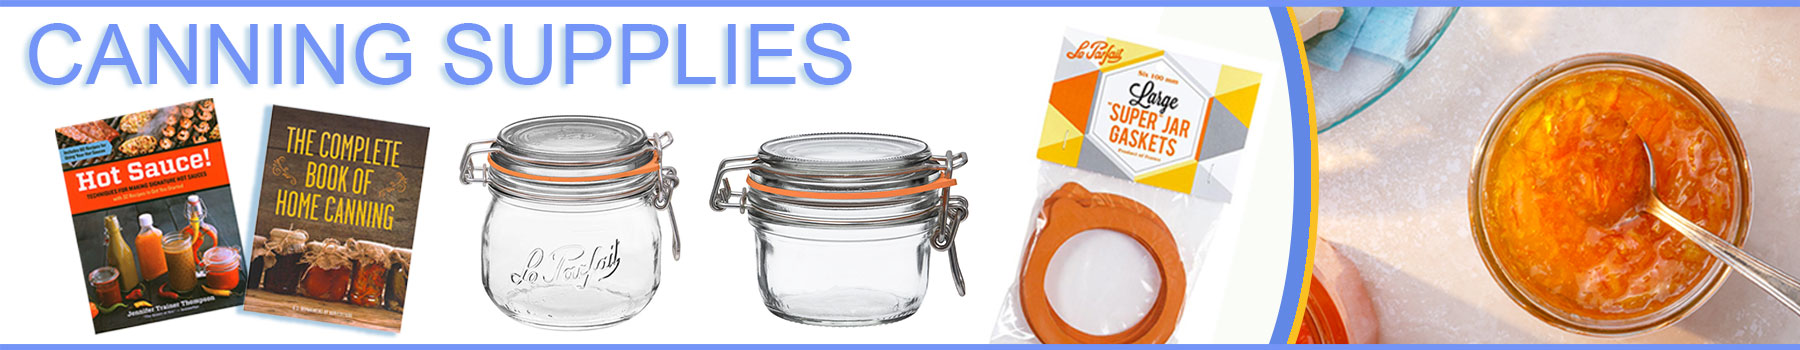 Canning Supplies Lids, Gaskets, Canning Books, Canning Jars